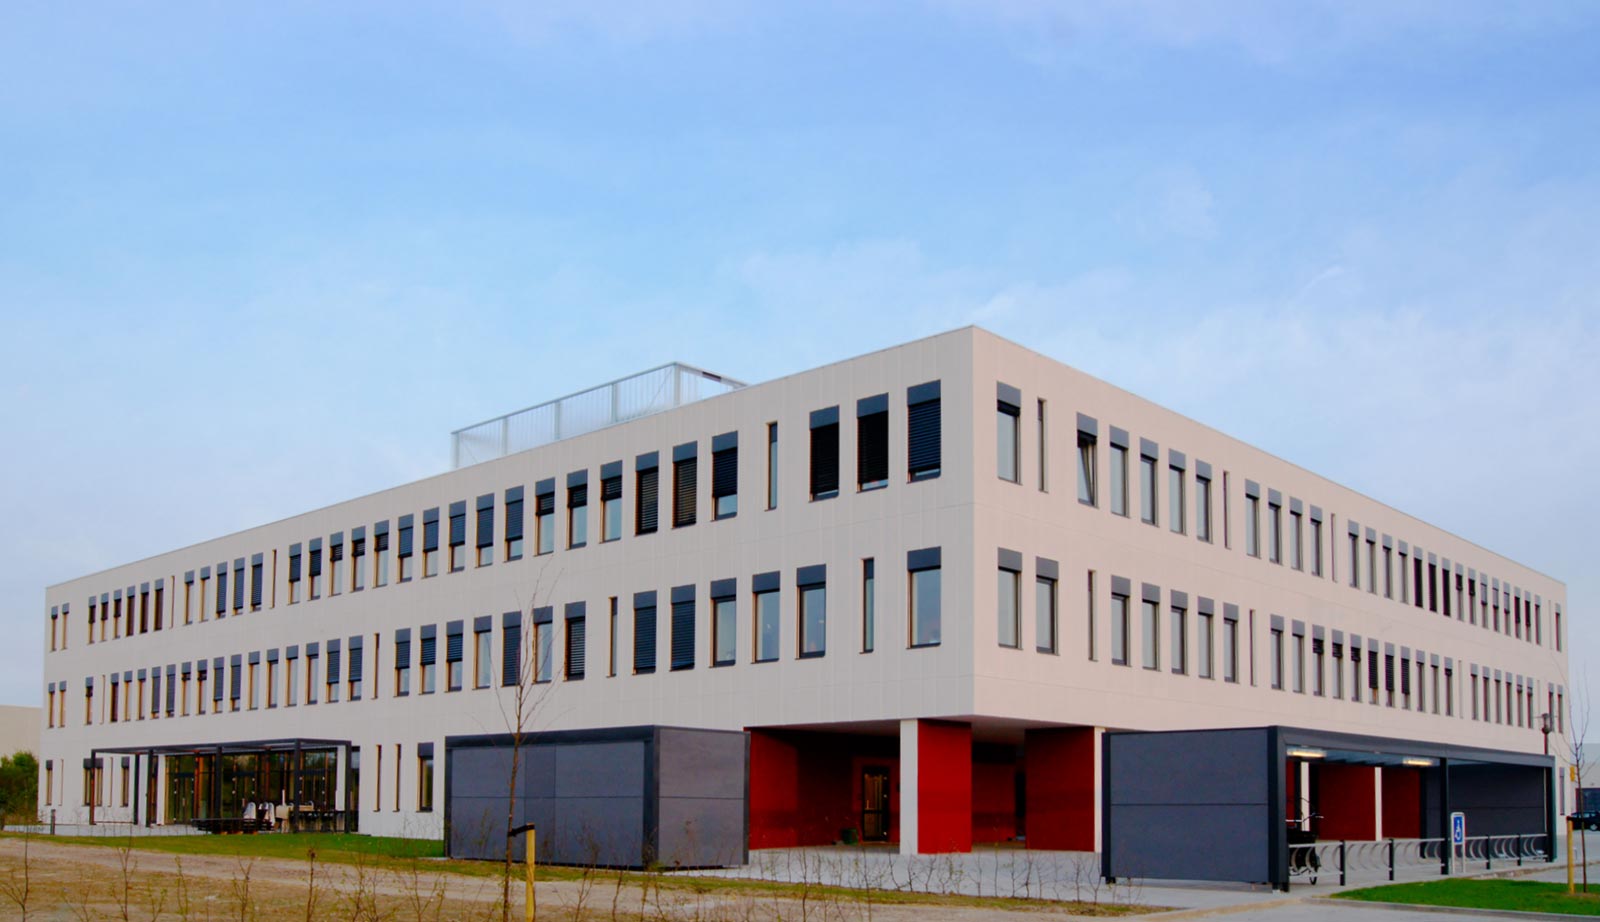 SuperGros Ringsted - Four-winged administration building in Ringsted holding 7.000 m2